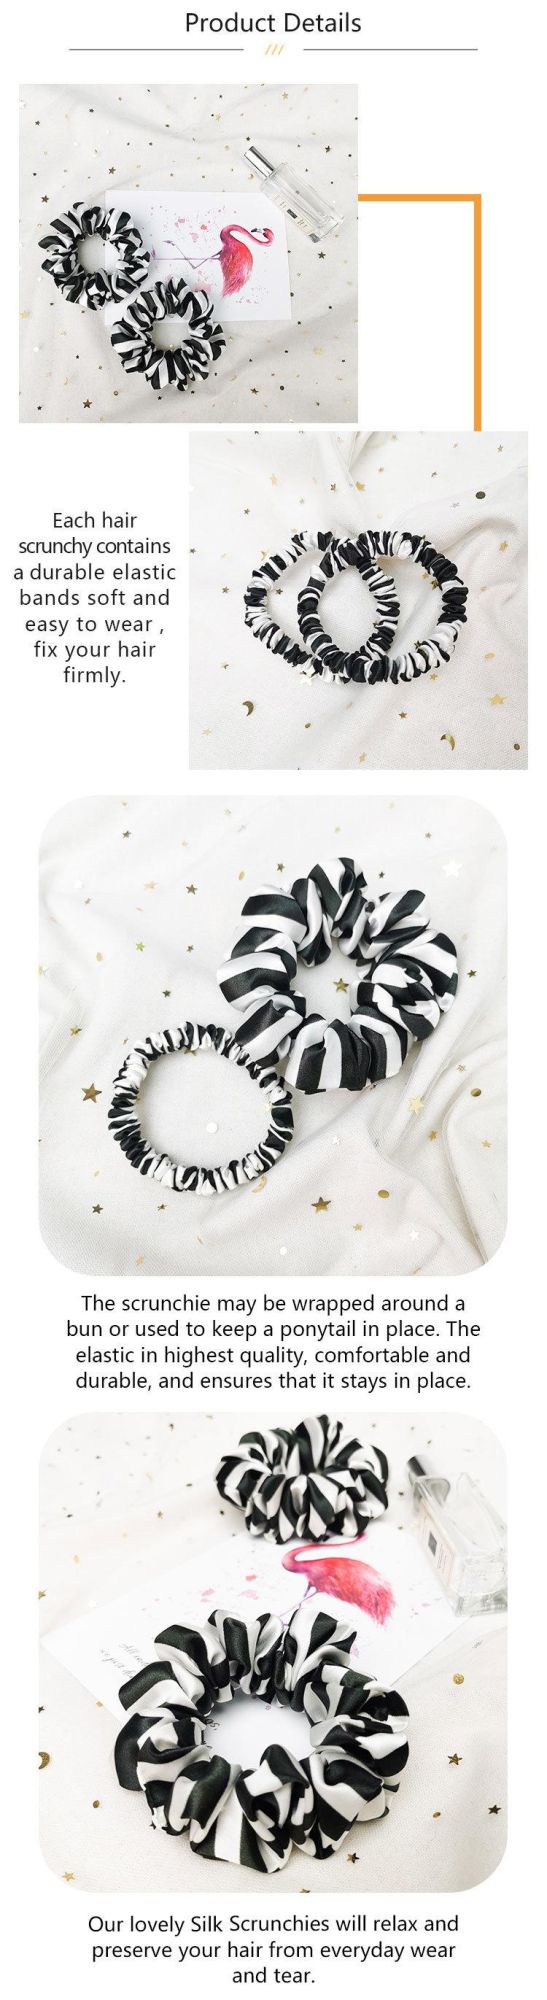 Fashionable Style Hair Accessories for Silk Scrunchies in High Quality